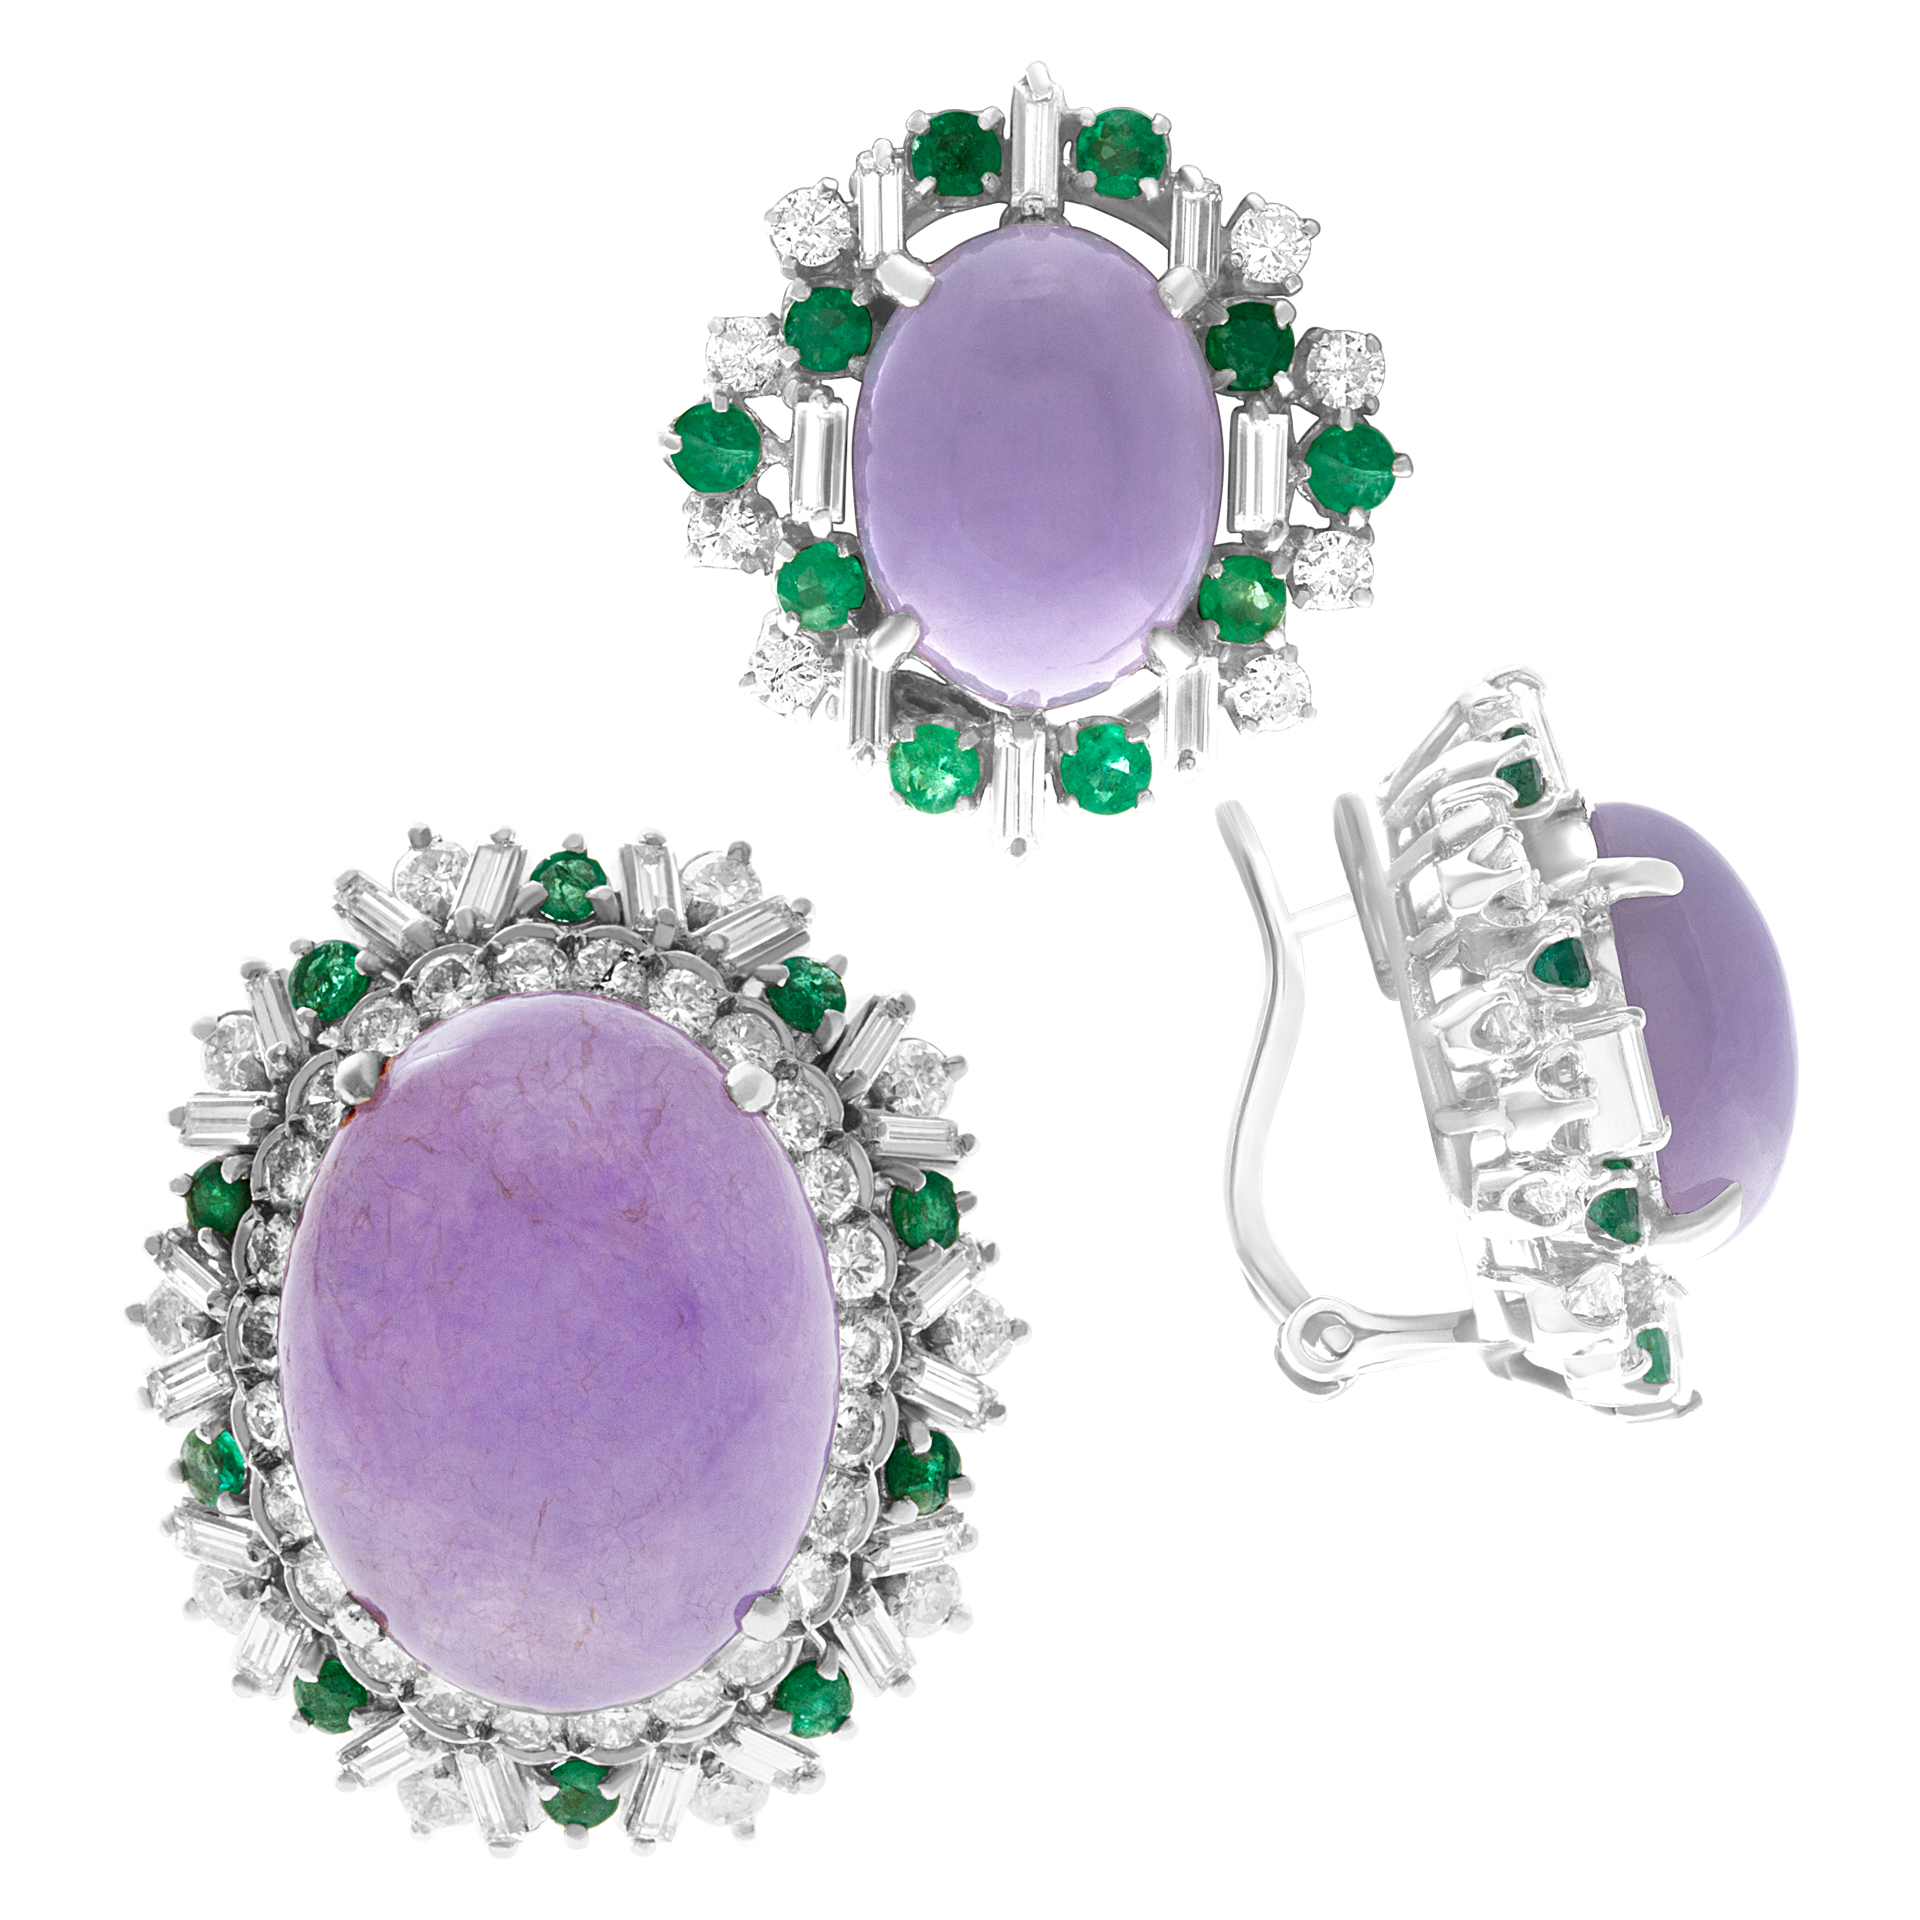 Lovely quartz earrings in 18k white gold with emerald and diamond accents image 1